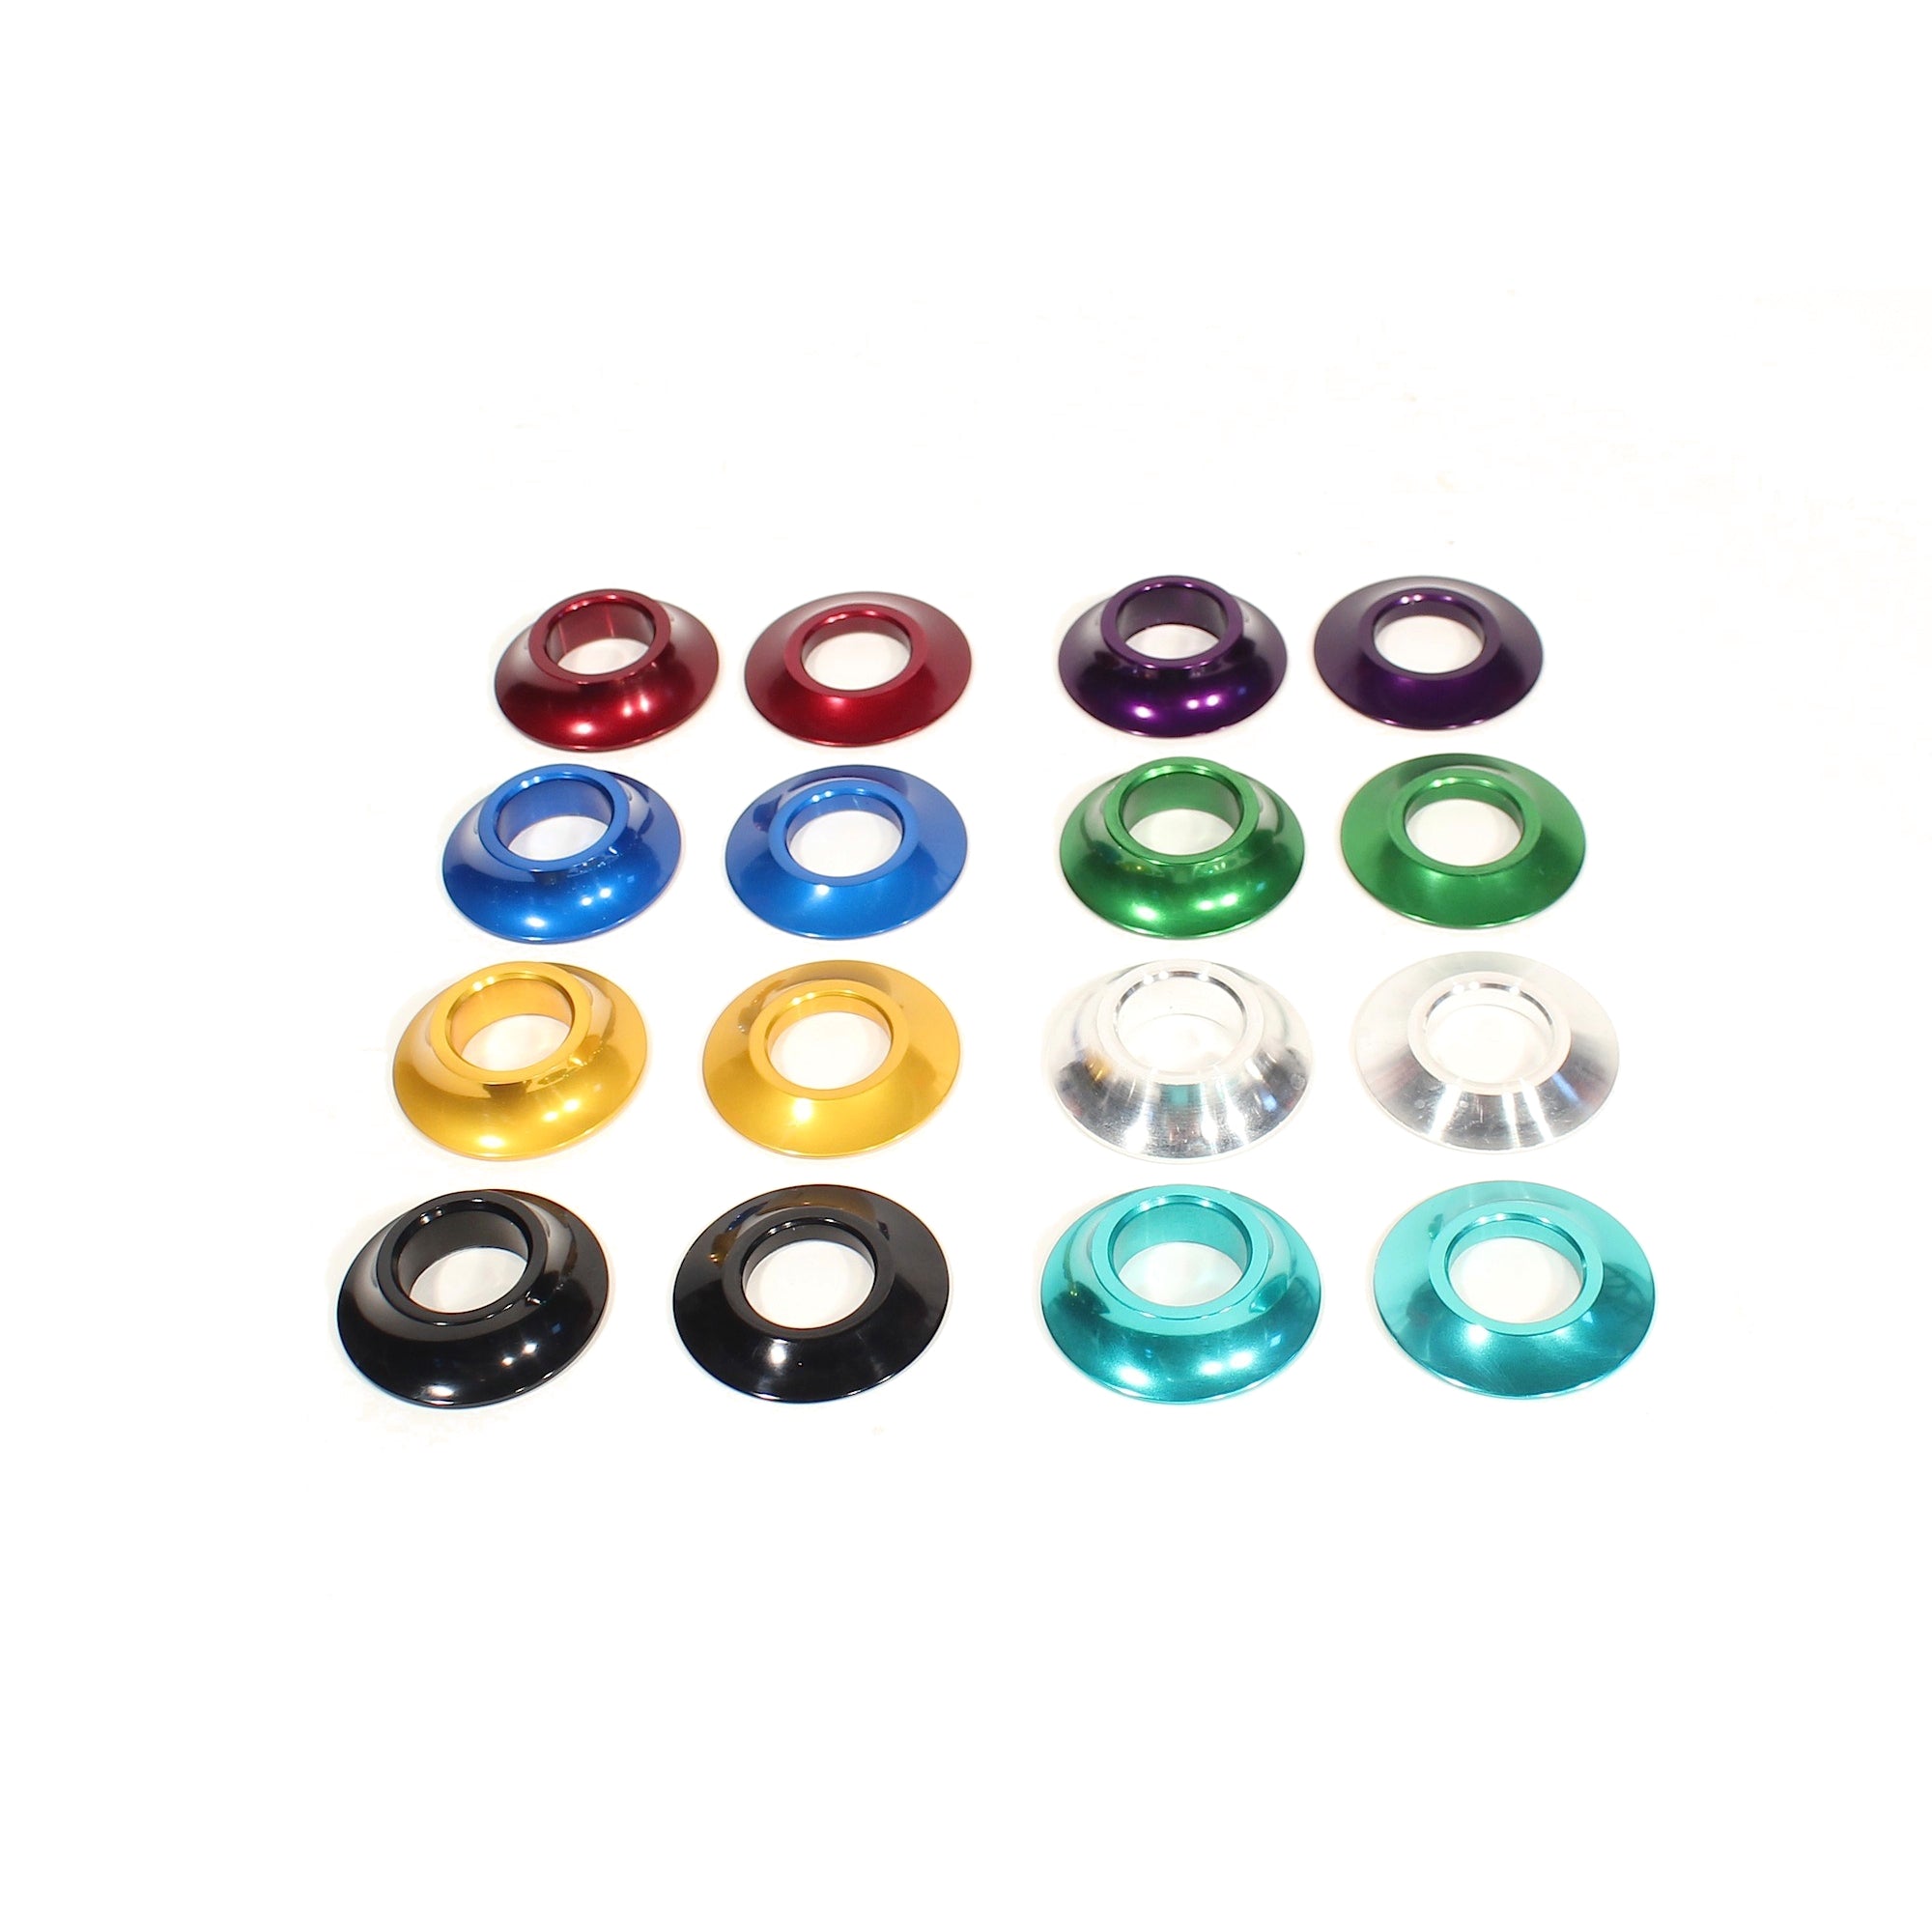 Profile Mid/American 19mm Cone Spacers - USA MADE